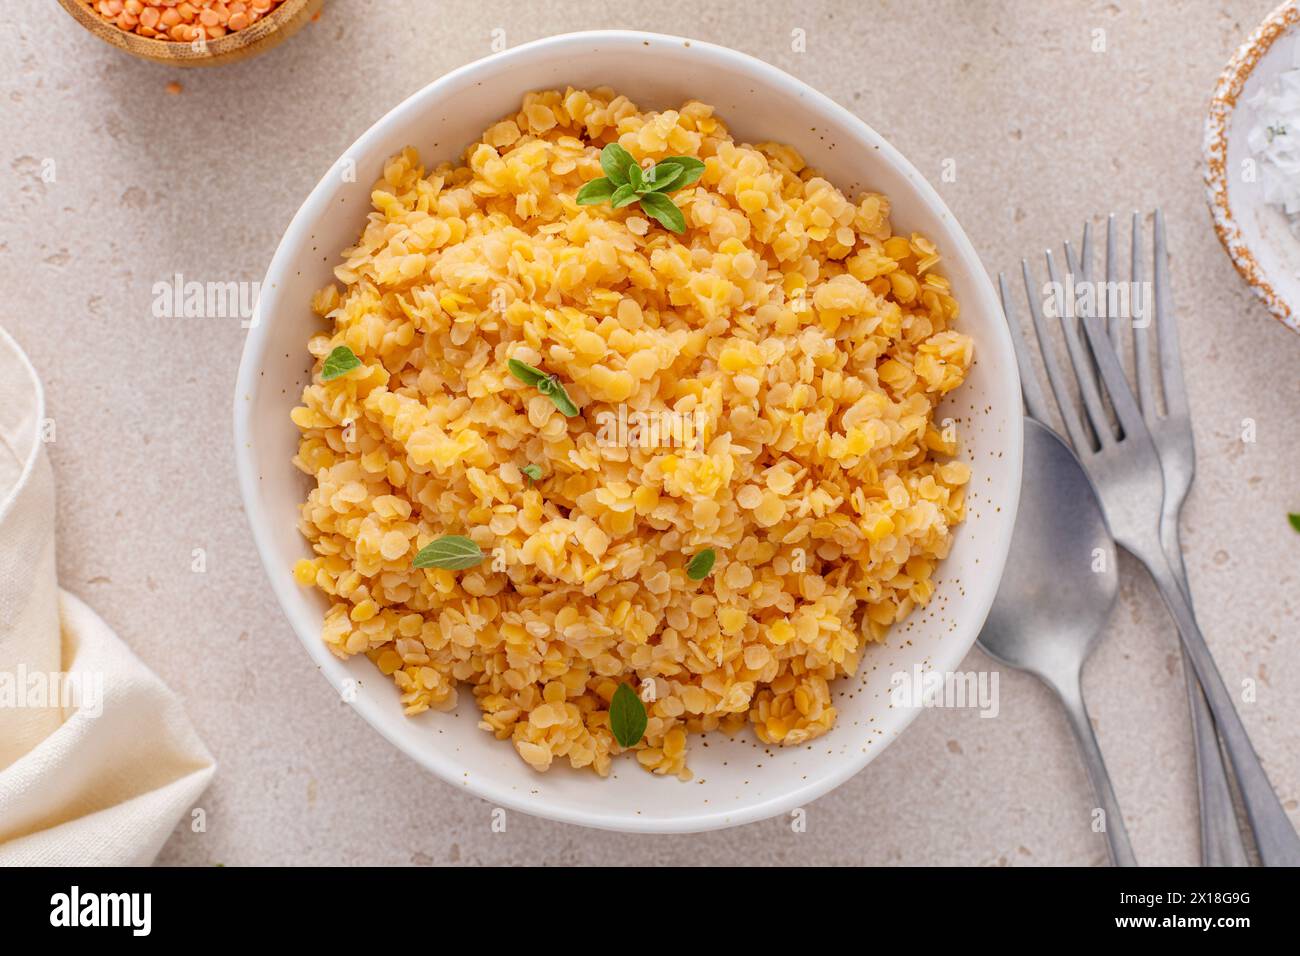 Cooked red lentils in a bowl, healthy vegan protein source, meat alternative Stock Photo